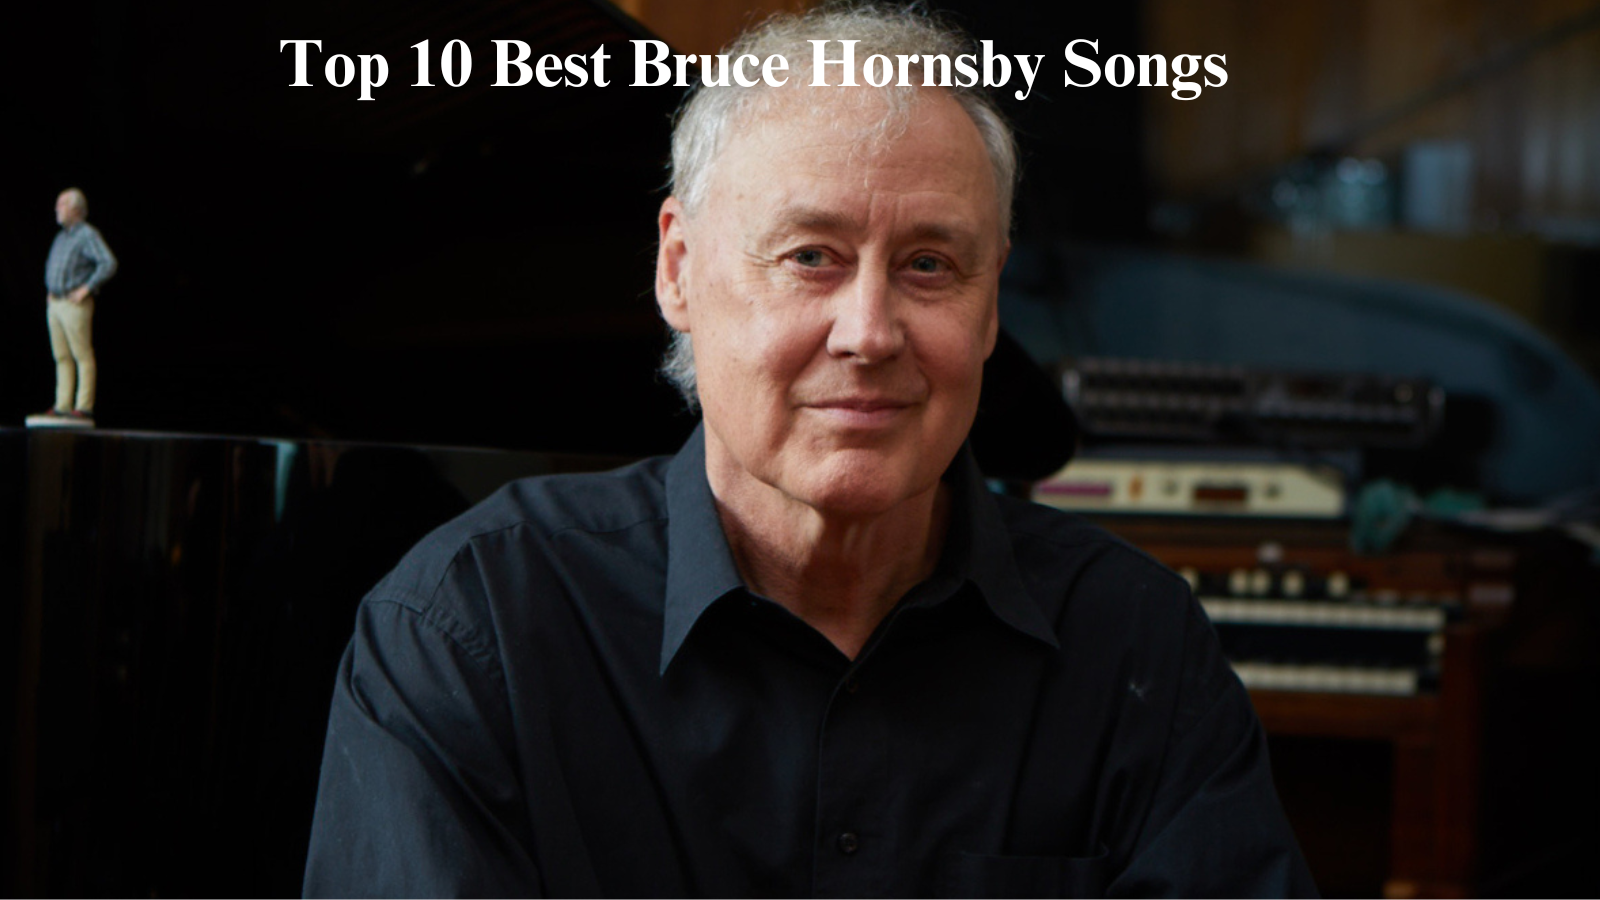 Top 10 Best Bruce Hornsby Songs